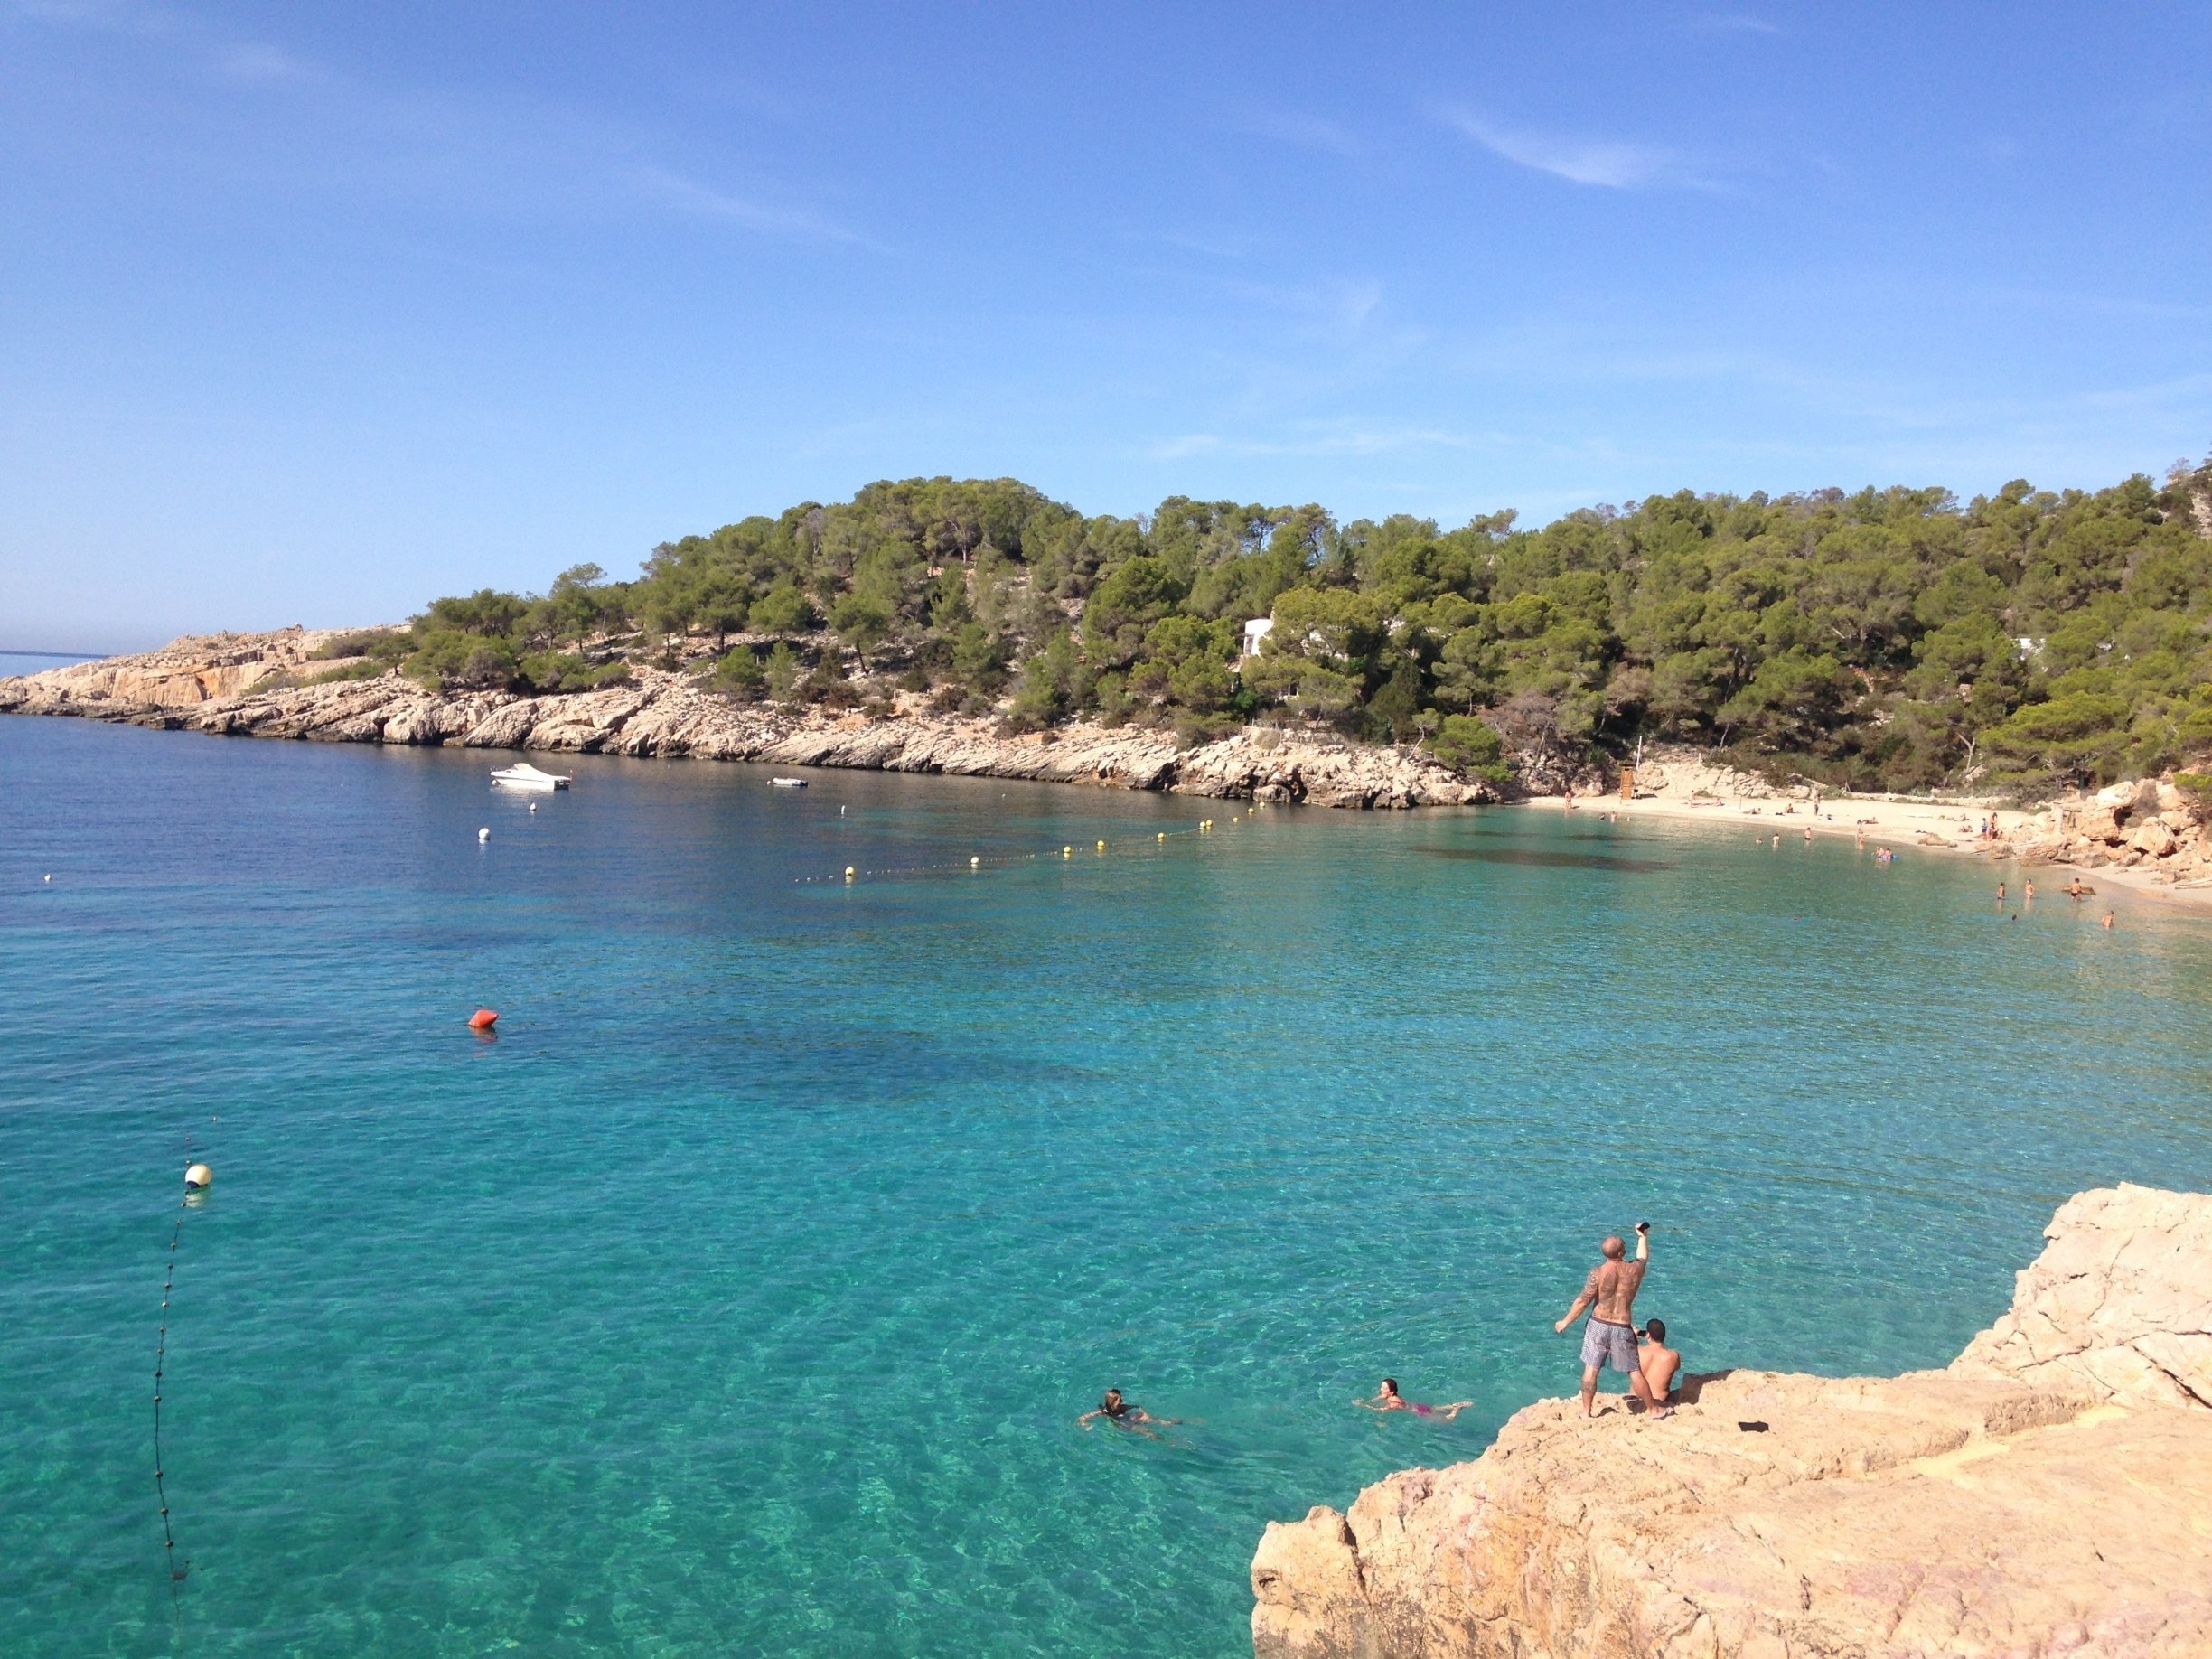 Cala Salada is definitely a beach you don't want to miss if you visit Ibiza! Just a short taxi ride from San Antonio, there are 2 separate beach areas to enjoy.  The rock pictured below is a great place to jump off into the clear sea water below!

#beach